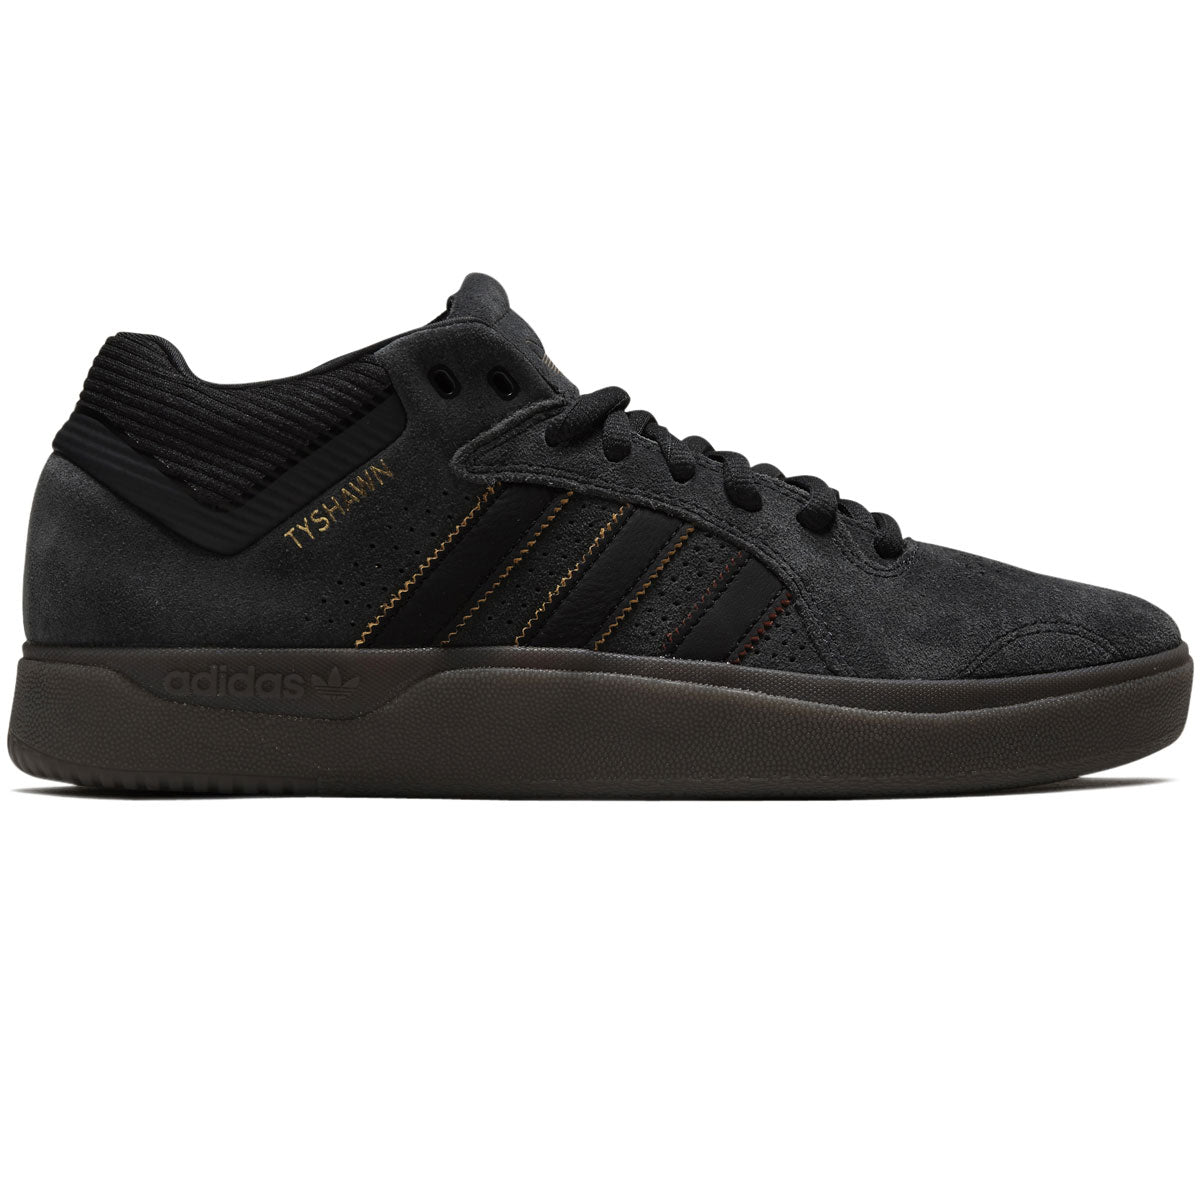 Adidas Tyshawn Shoes - Carbon/Core Black/Preloved Brown image 1